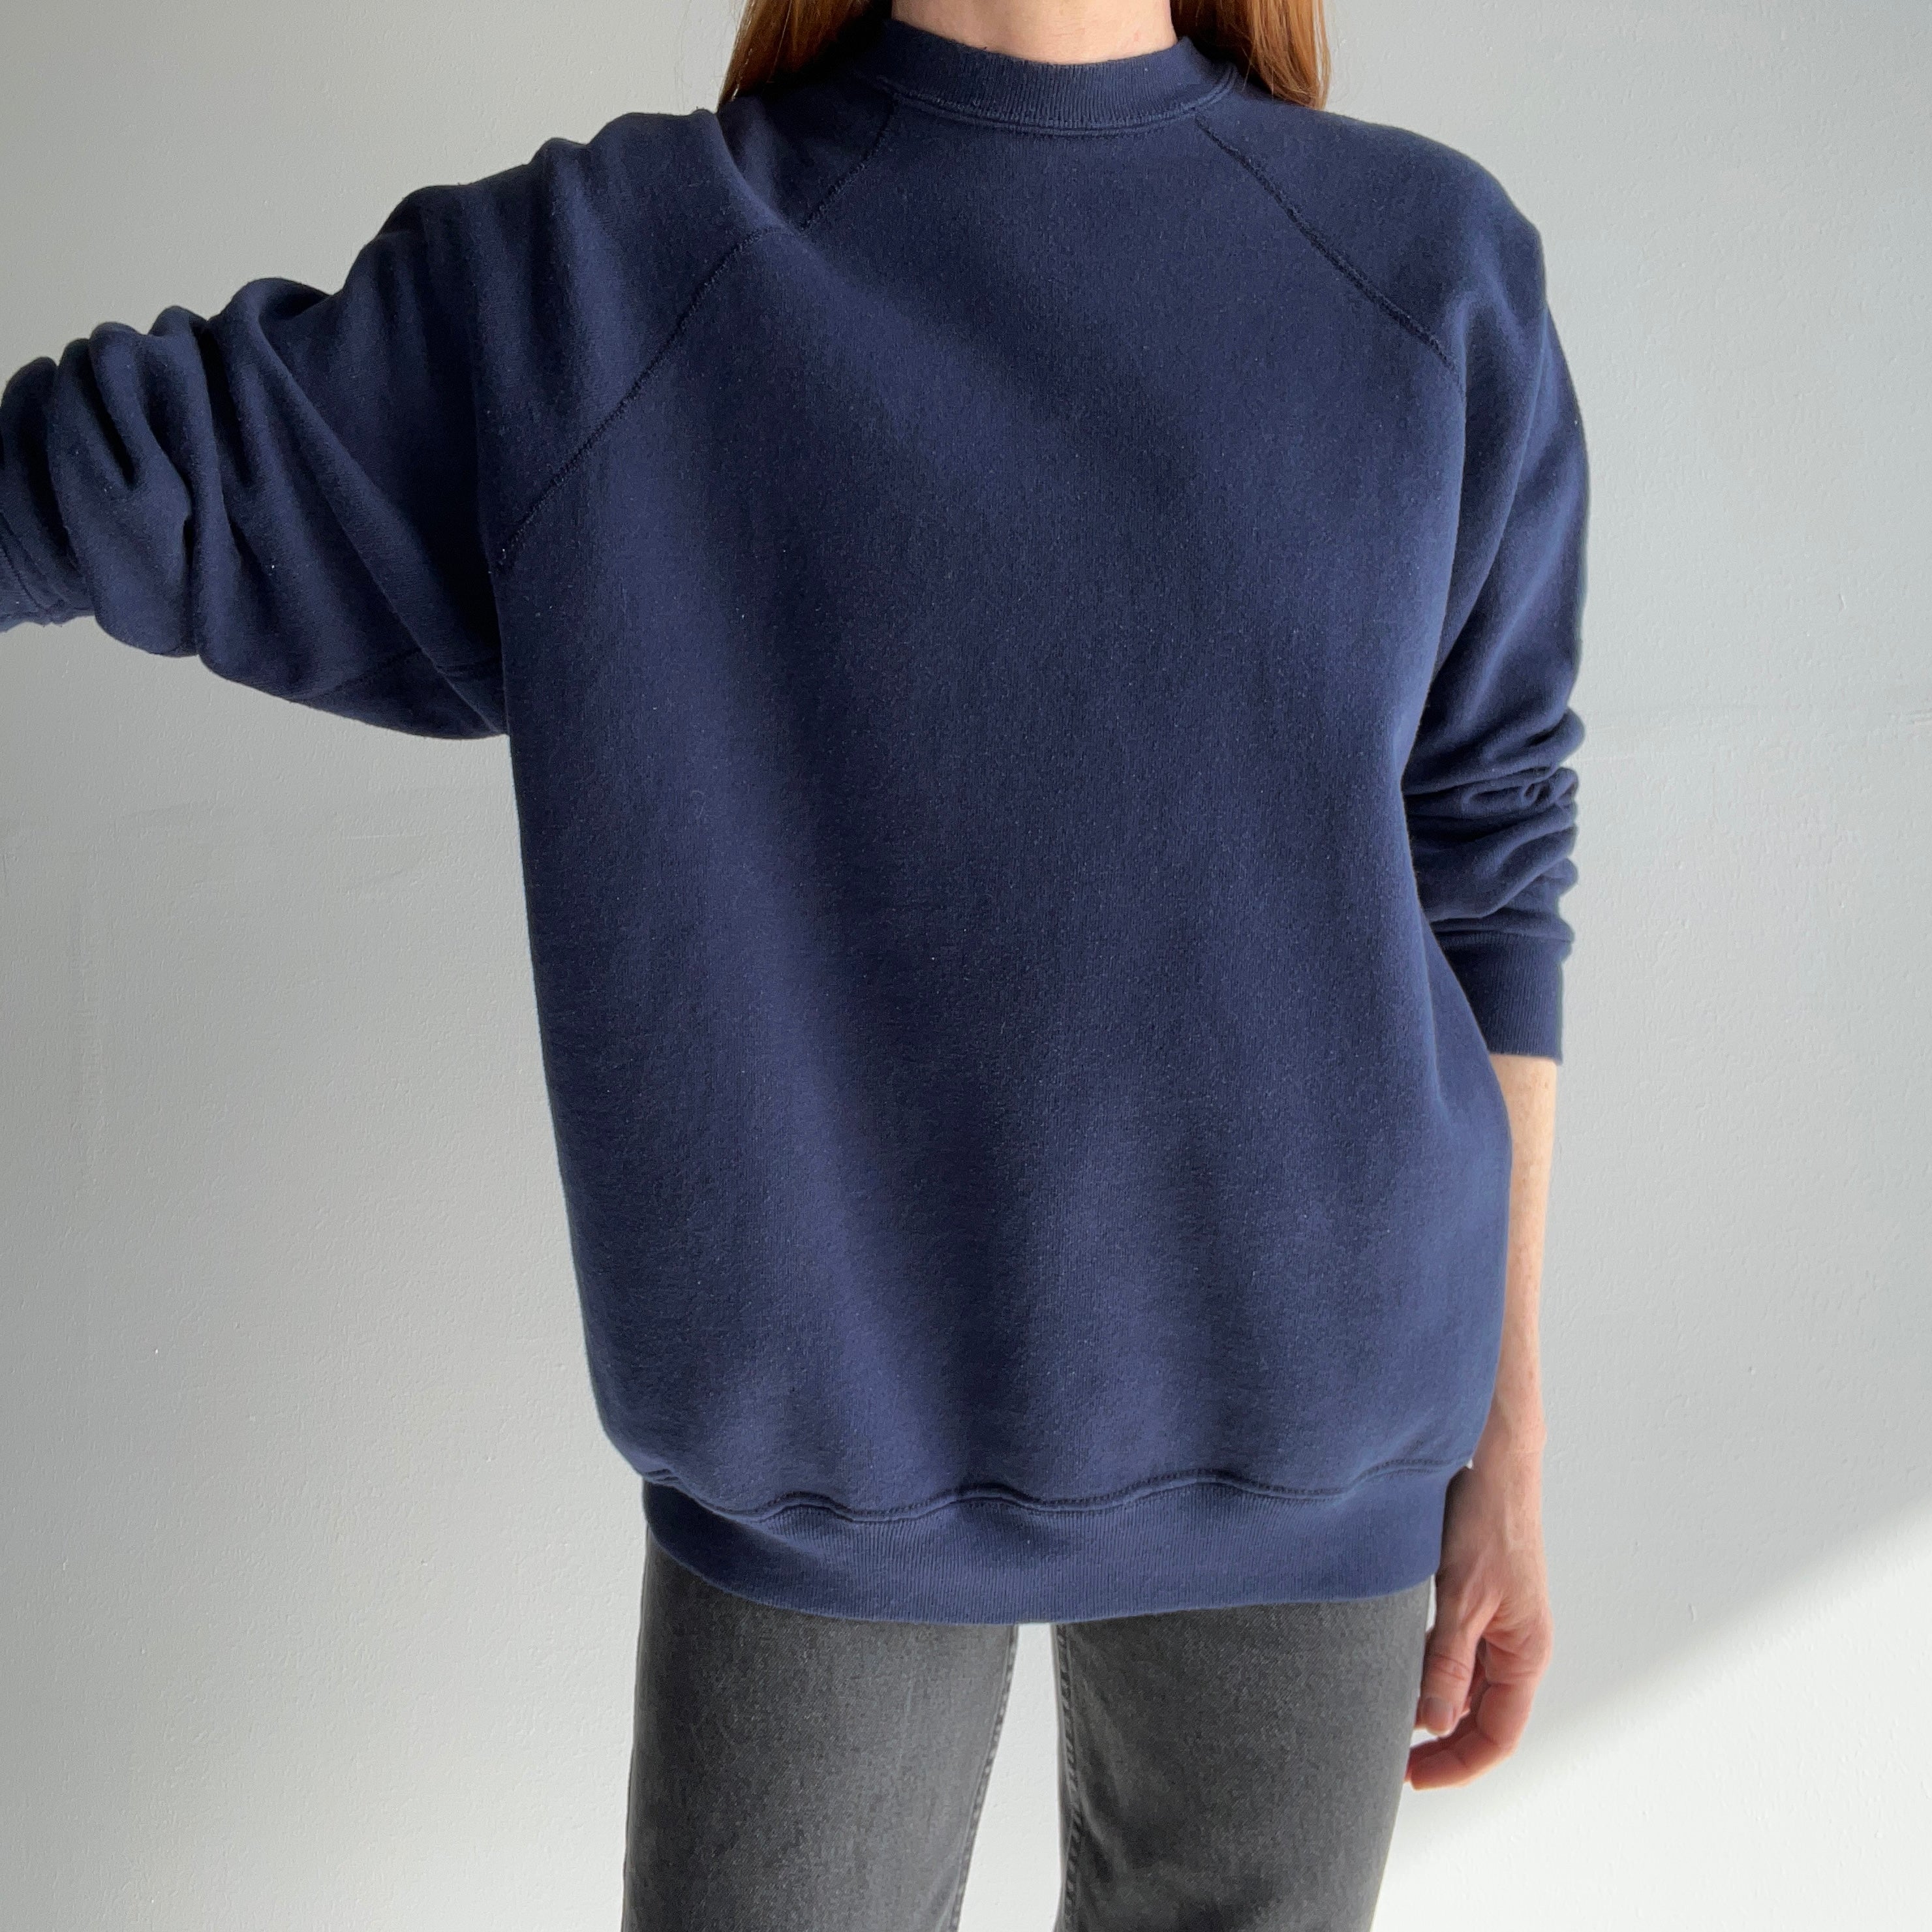 1980s Heavyweight Discus Sweatshirt with Under Arm Gussets